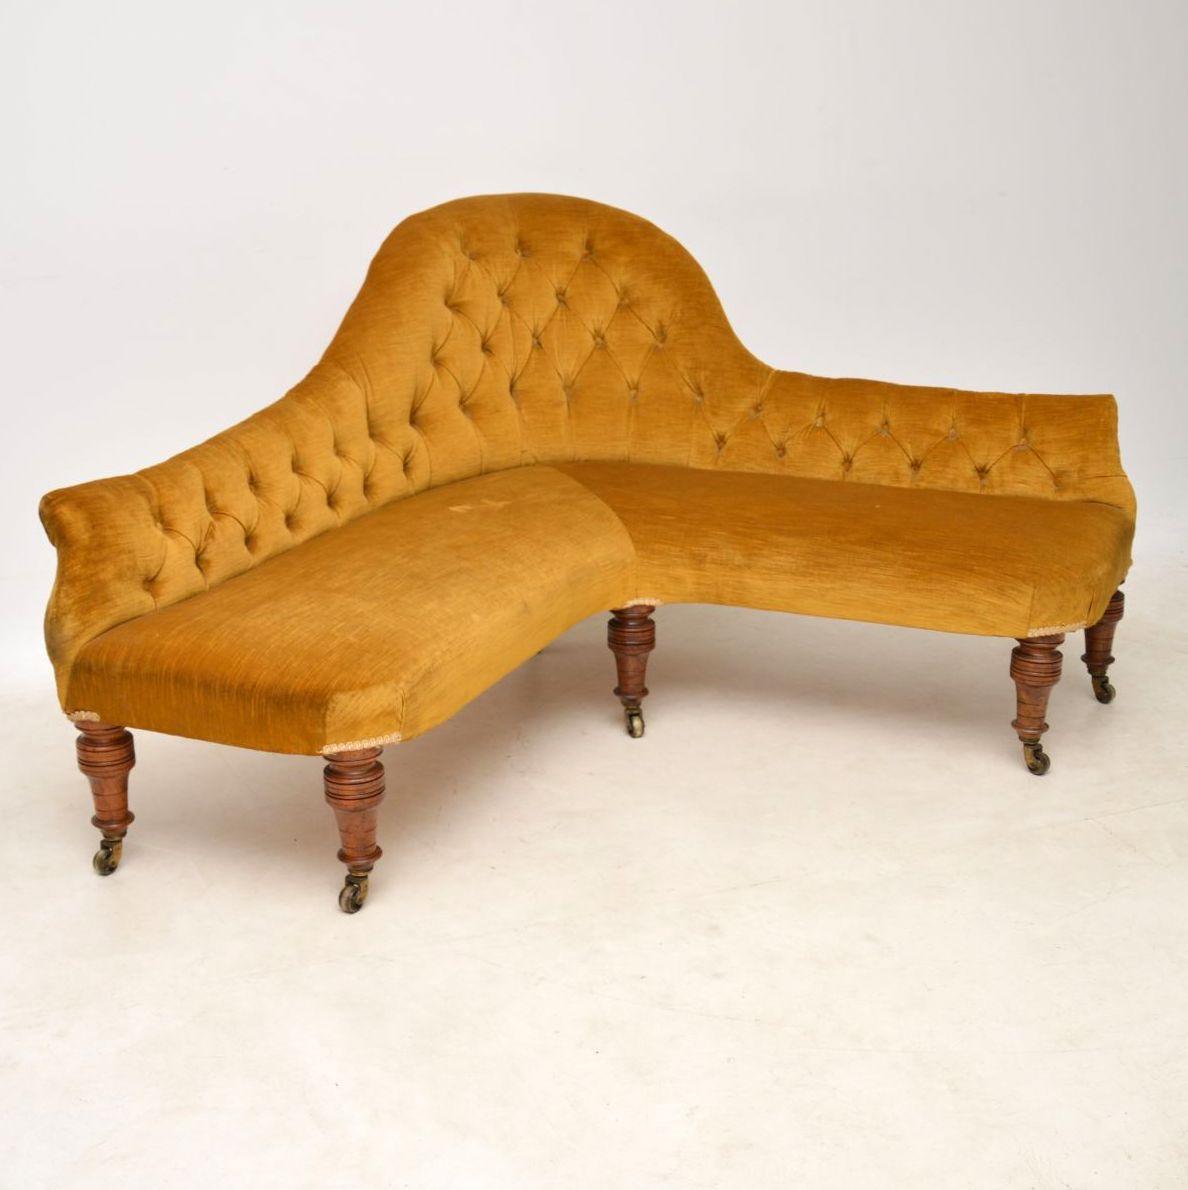 Very unusual antique Victorian corner chaise longue dating to circa 1860s-1880s period on mahogany turned legs with original brass casters. I've never come across a chaise longue of this corner design before and I think it's works quite well, plus